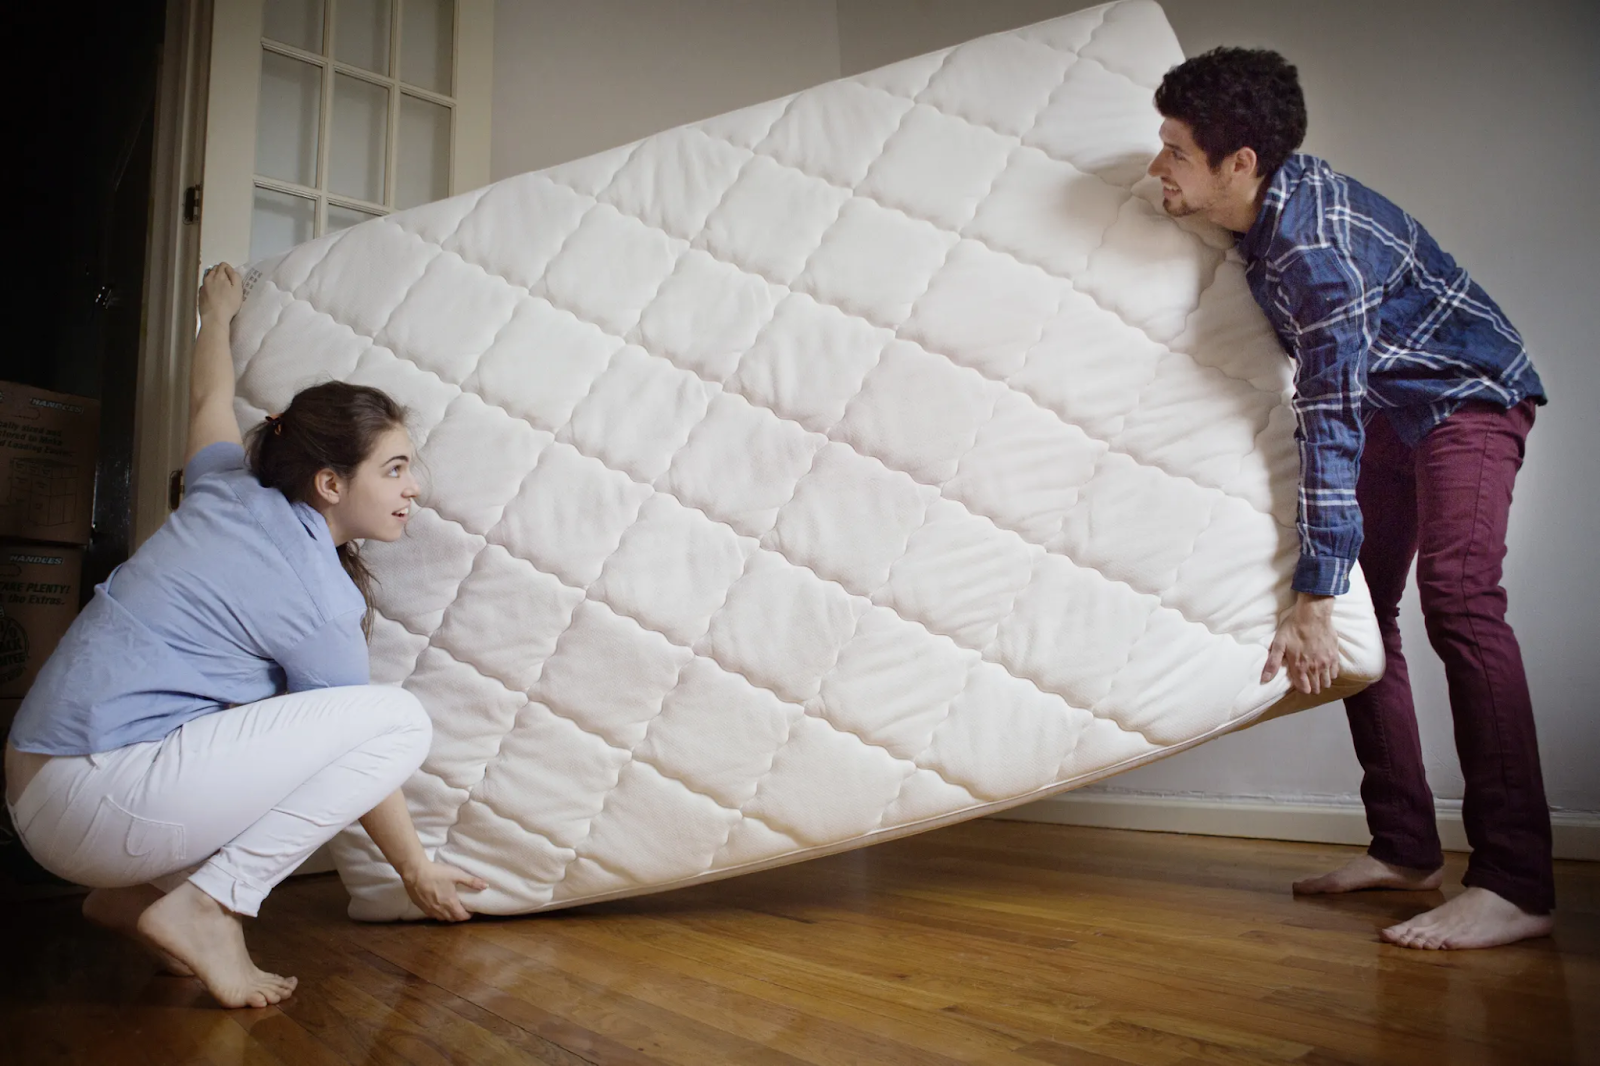 replace mattress and box spring after heat treatment